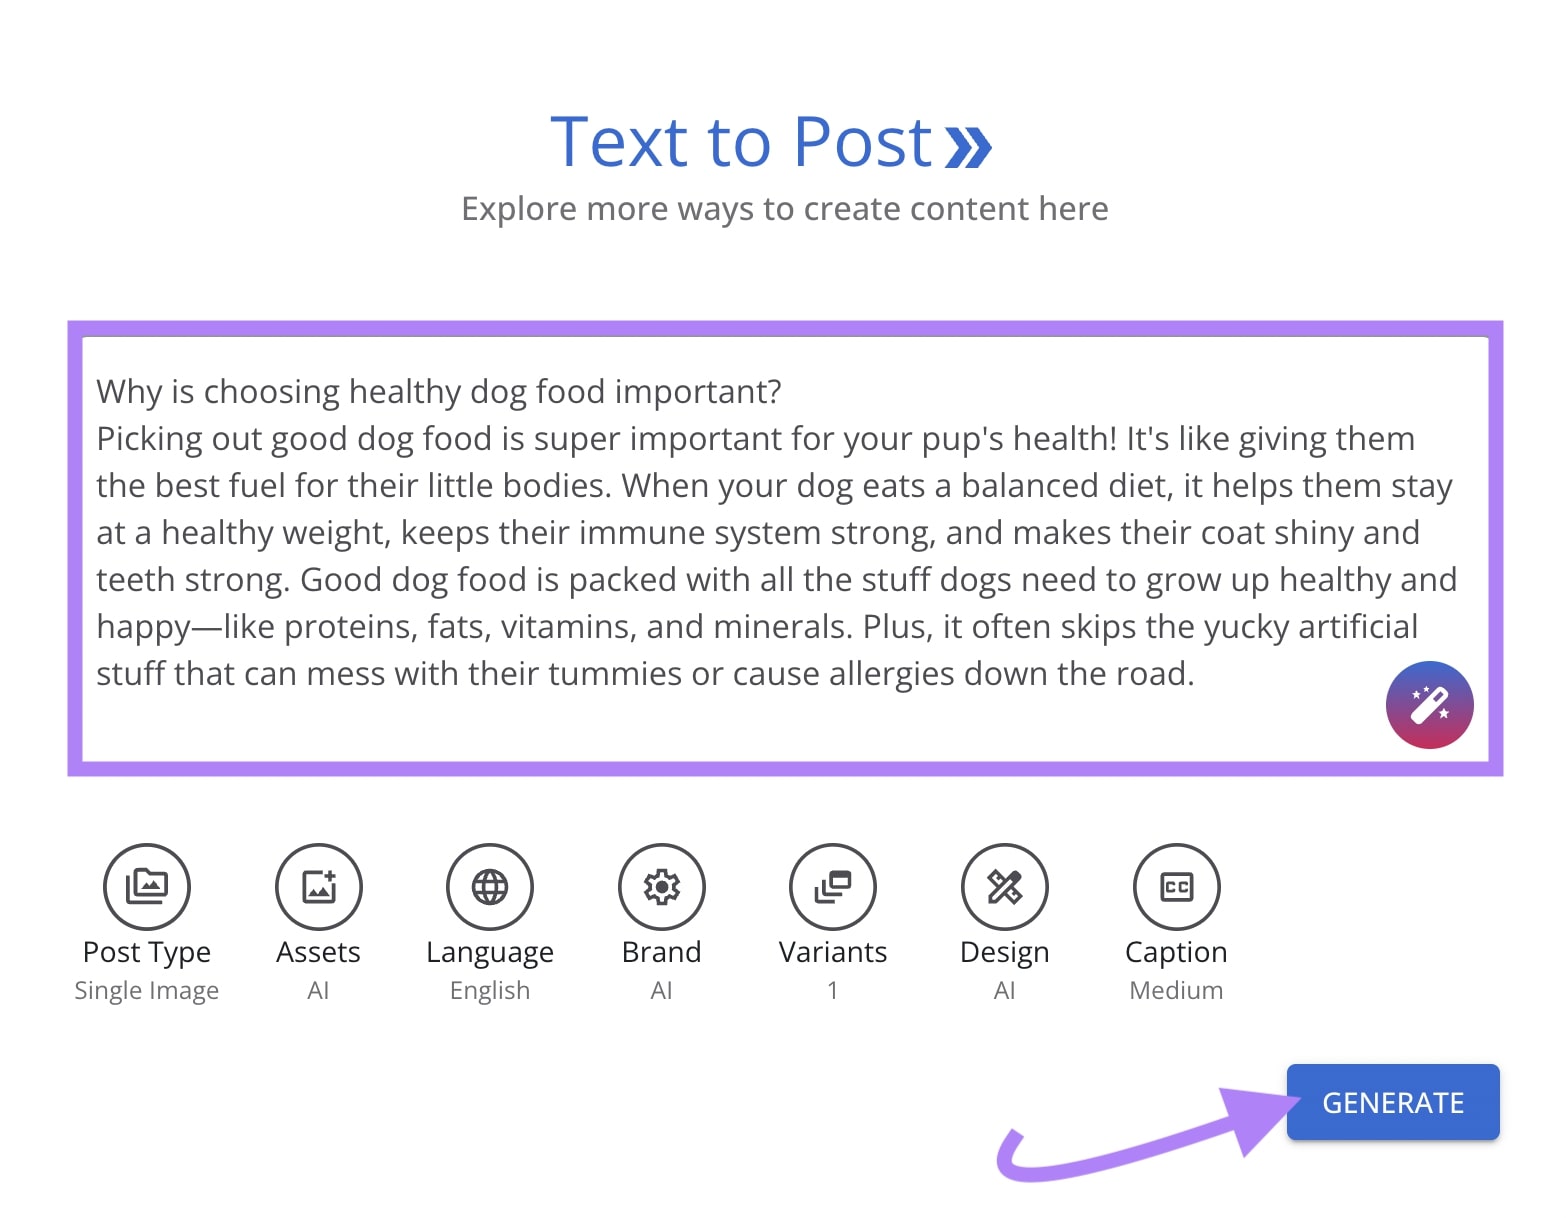 Text to post section of the Semrush AI Content Generator tool with text describing why choosing healthy  food is important